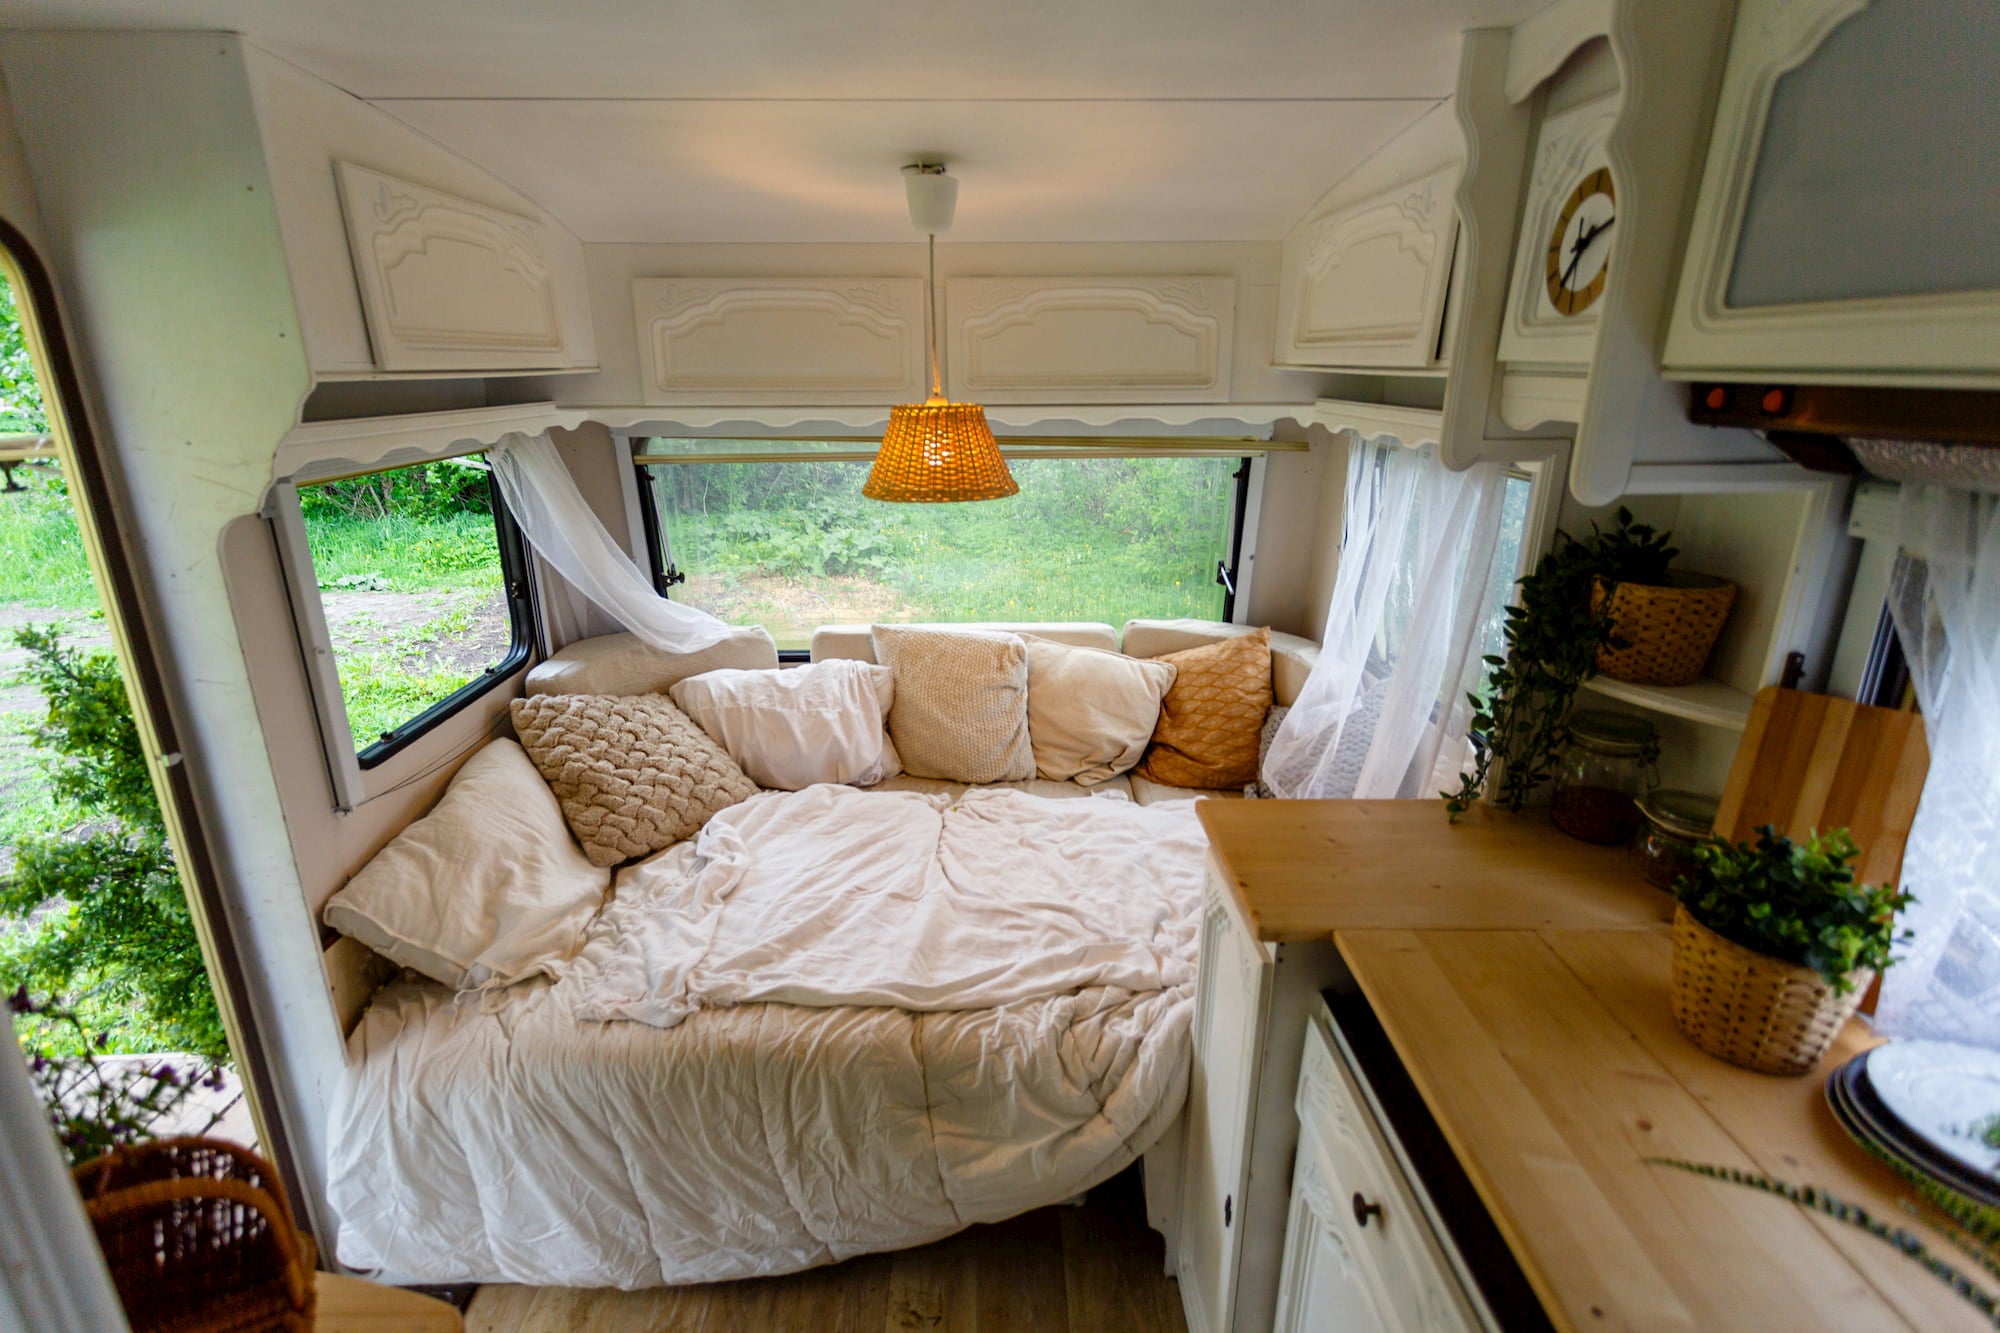 inside of rv, bed and day bed